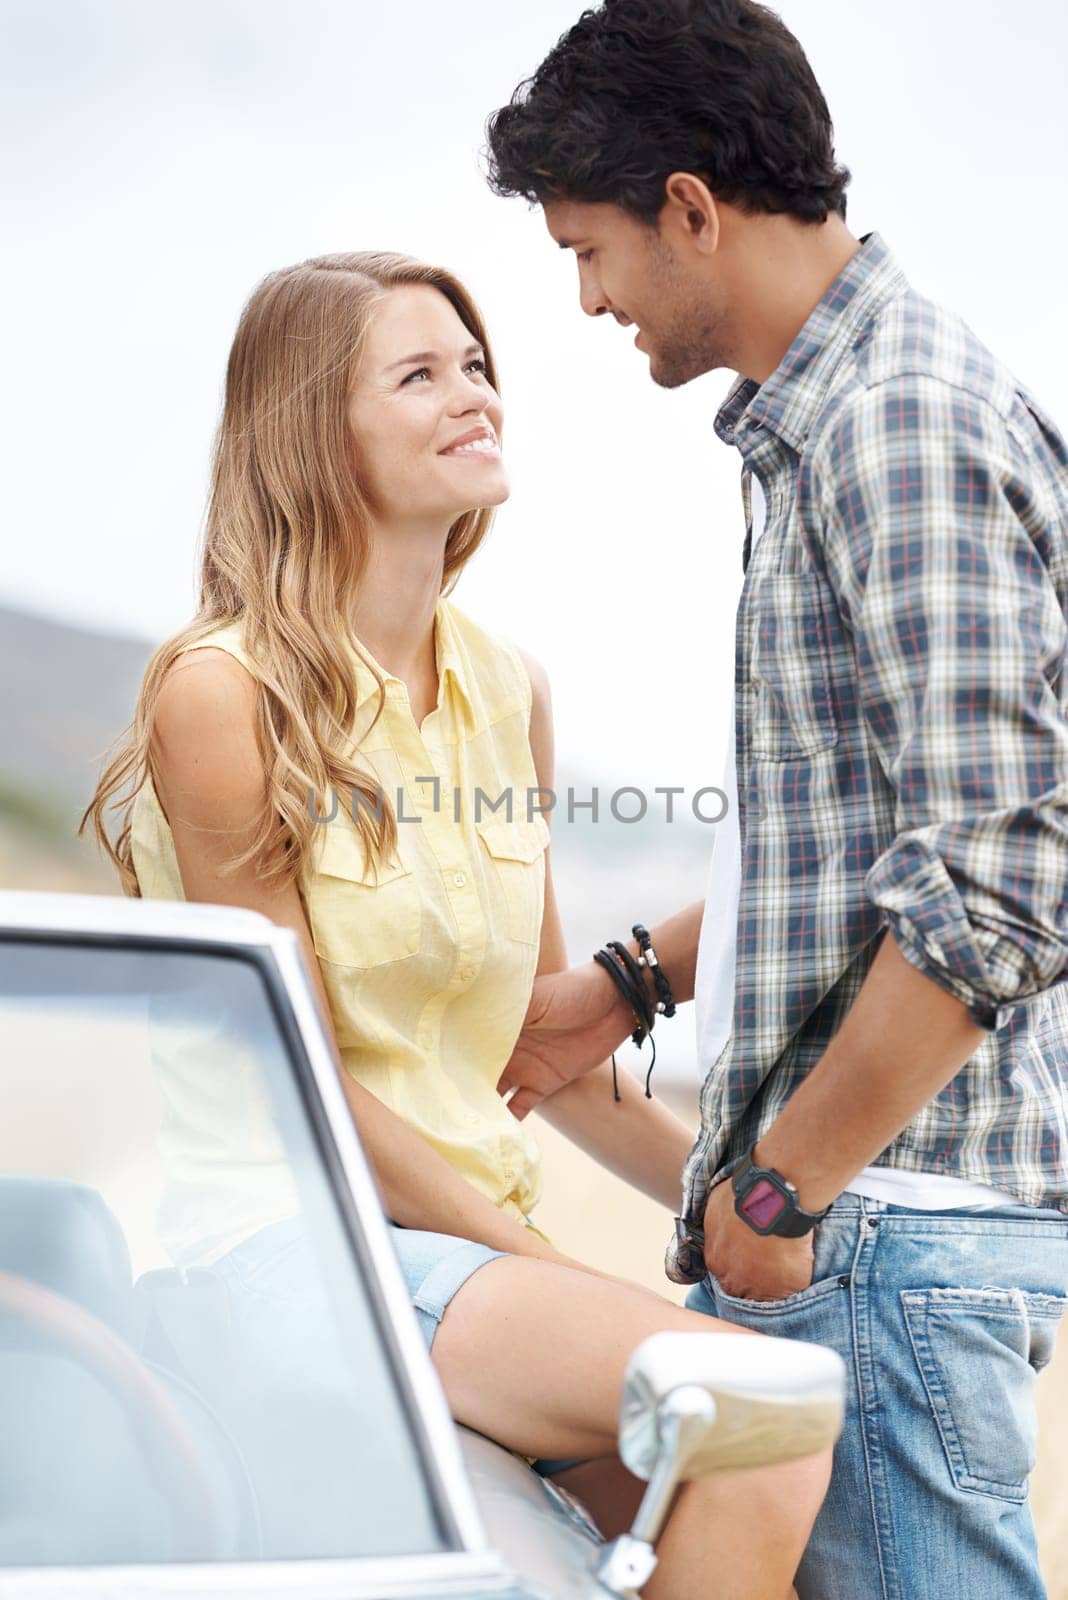 Sharing that special look. A young couple sharing a romantic moment on a hilltop after taking a scenic drive